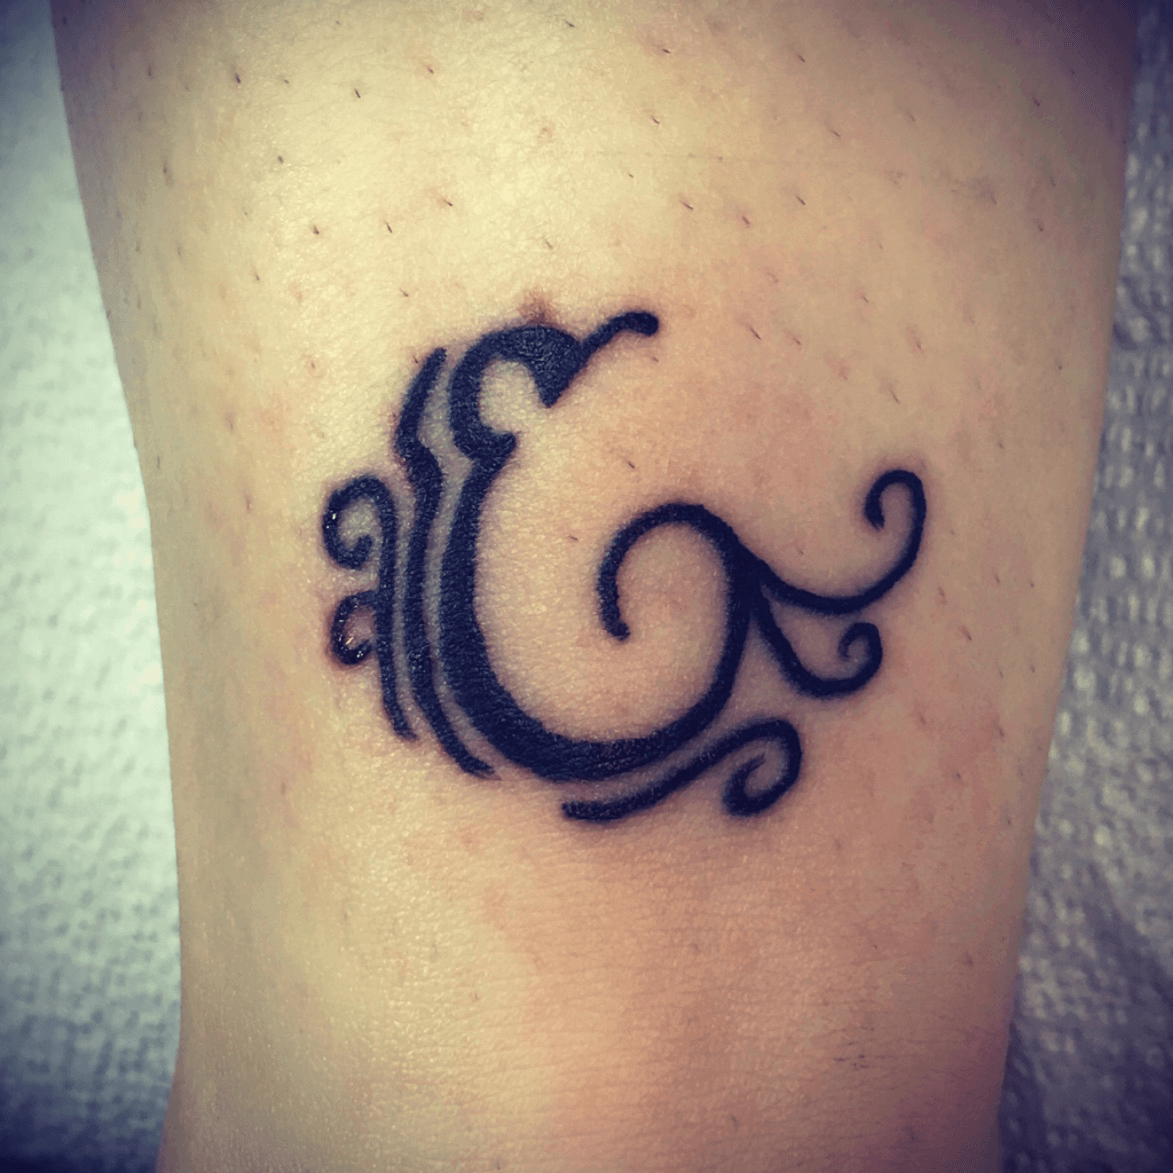 Tattoo uploaded by Kaylin Kerchner  Ampersand broken infinity meaning  nothing lasts forever but there is always an and ampersand legtattoo   Tattoodo